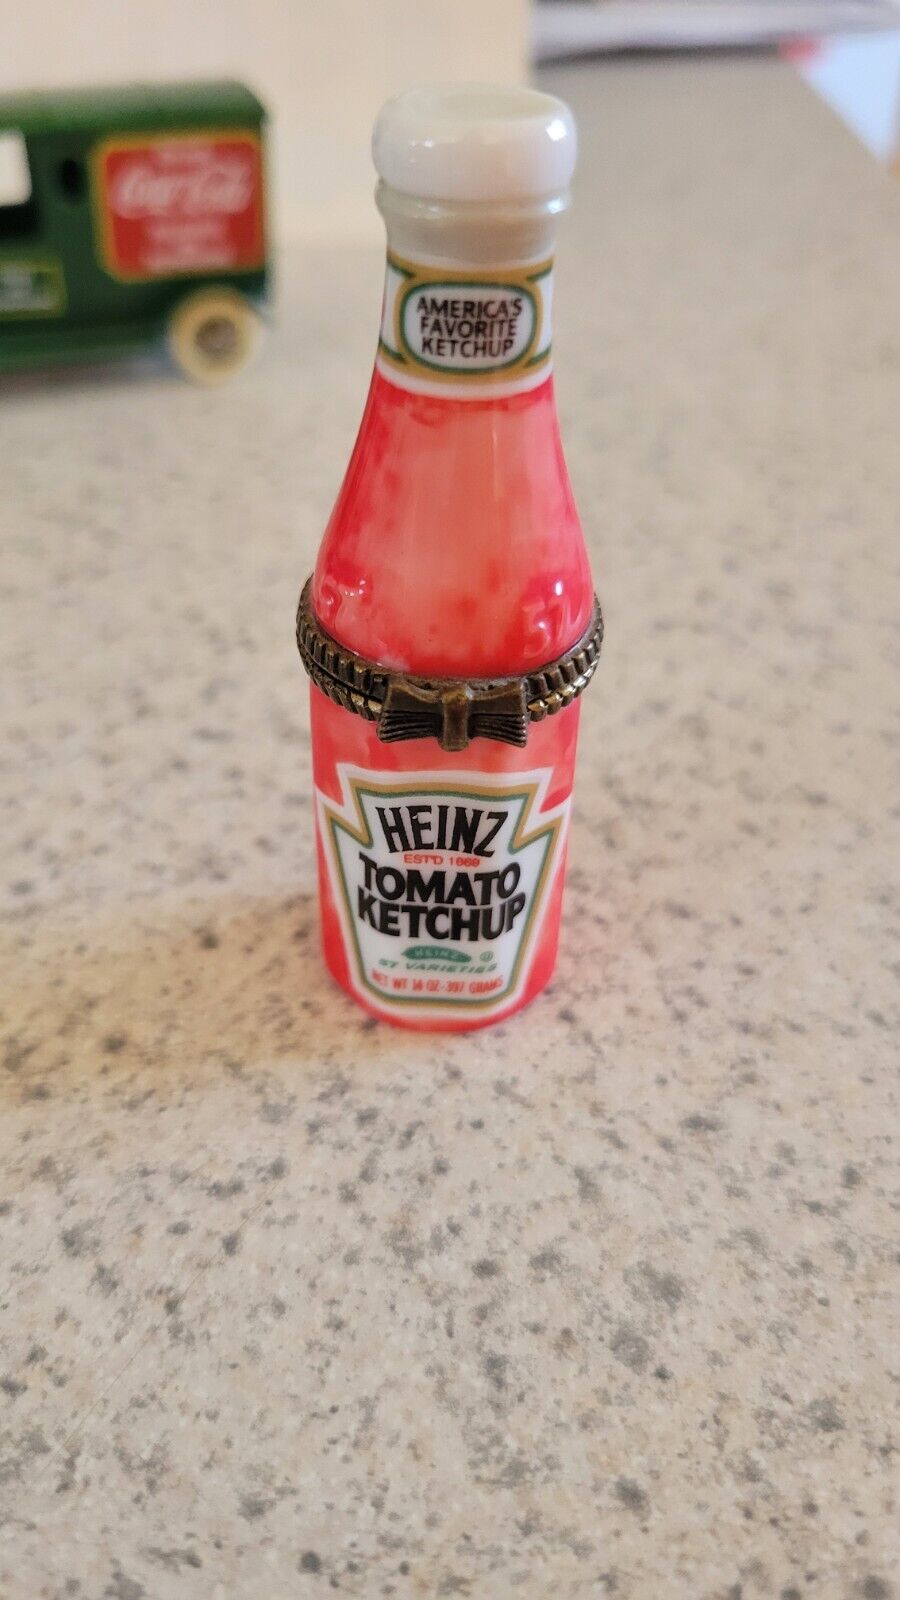 Heinz Ketchup Bottle  PHB Porcelain Hinged Box by Midwest of Cannon Falls